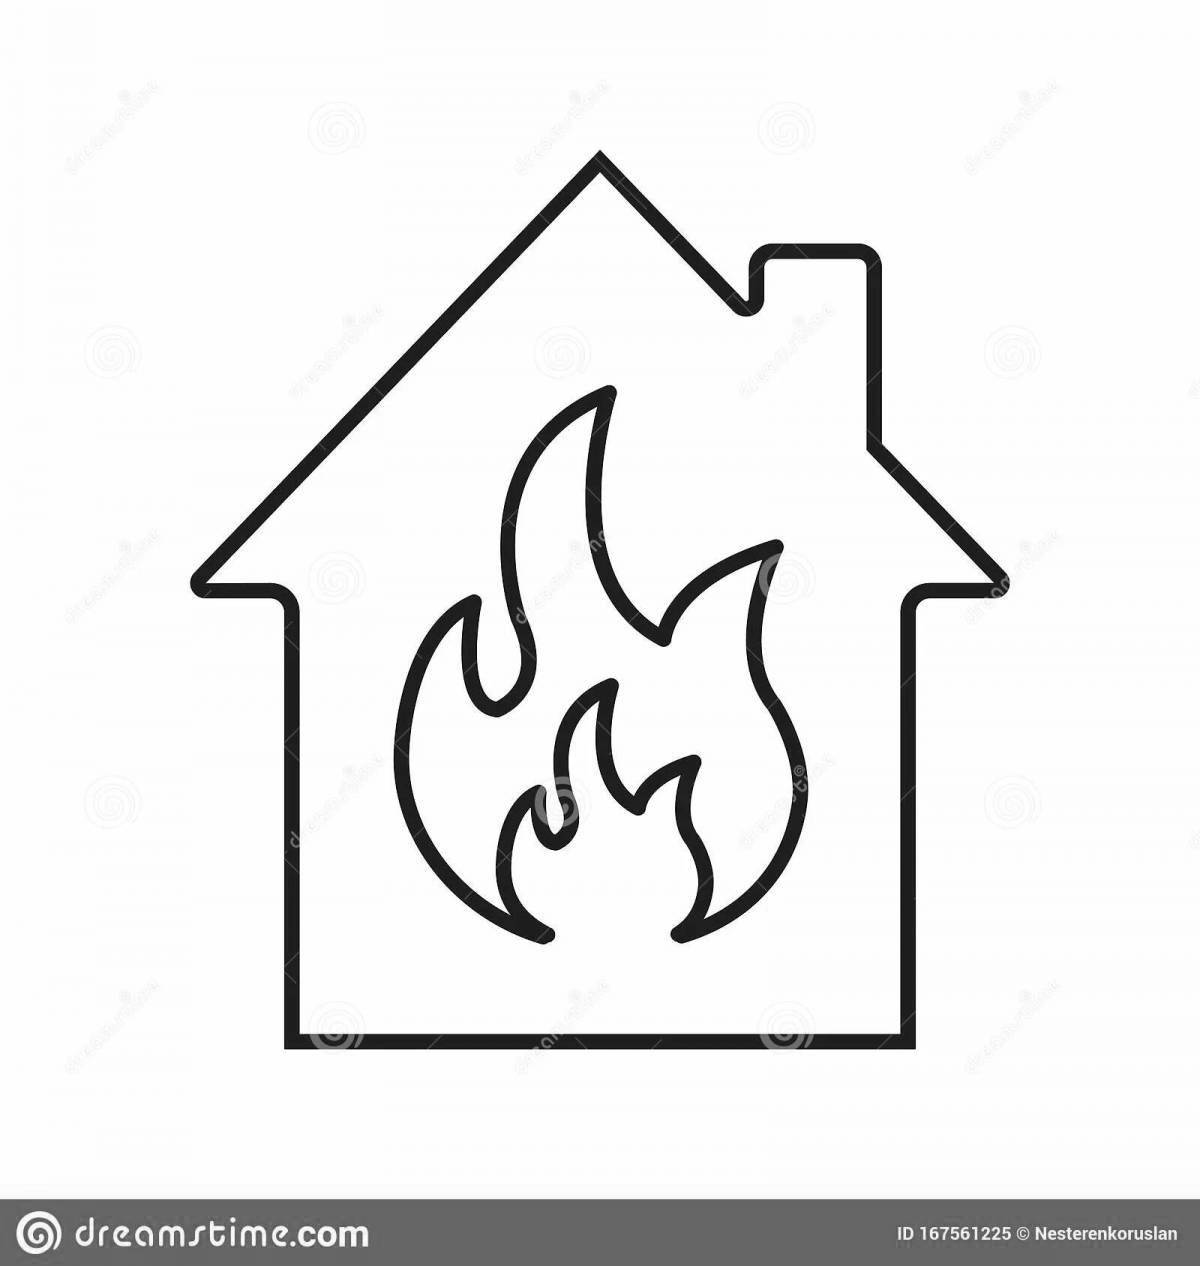 Glowing burning house coloring book for kids